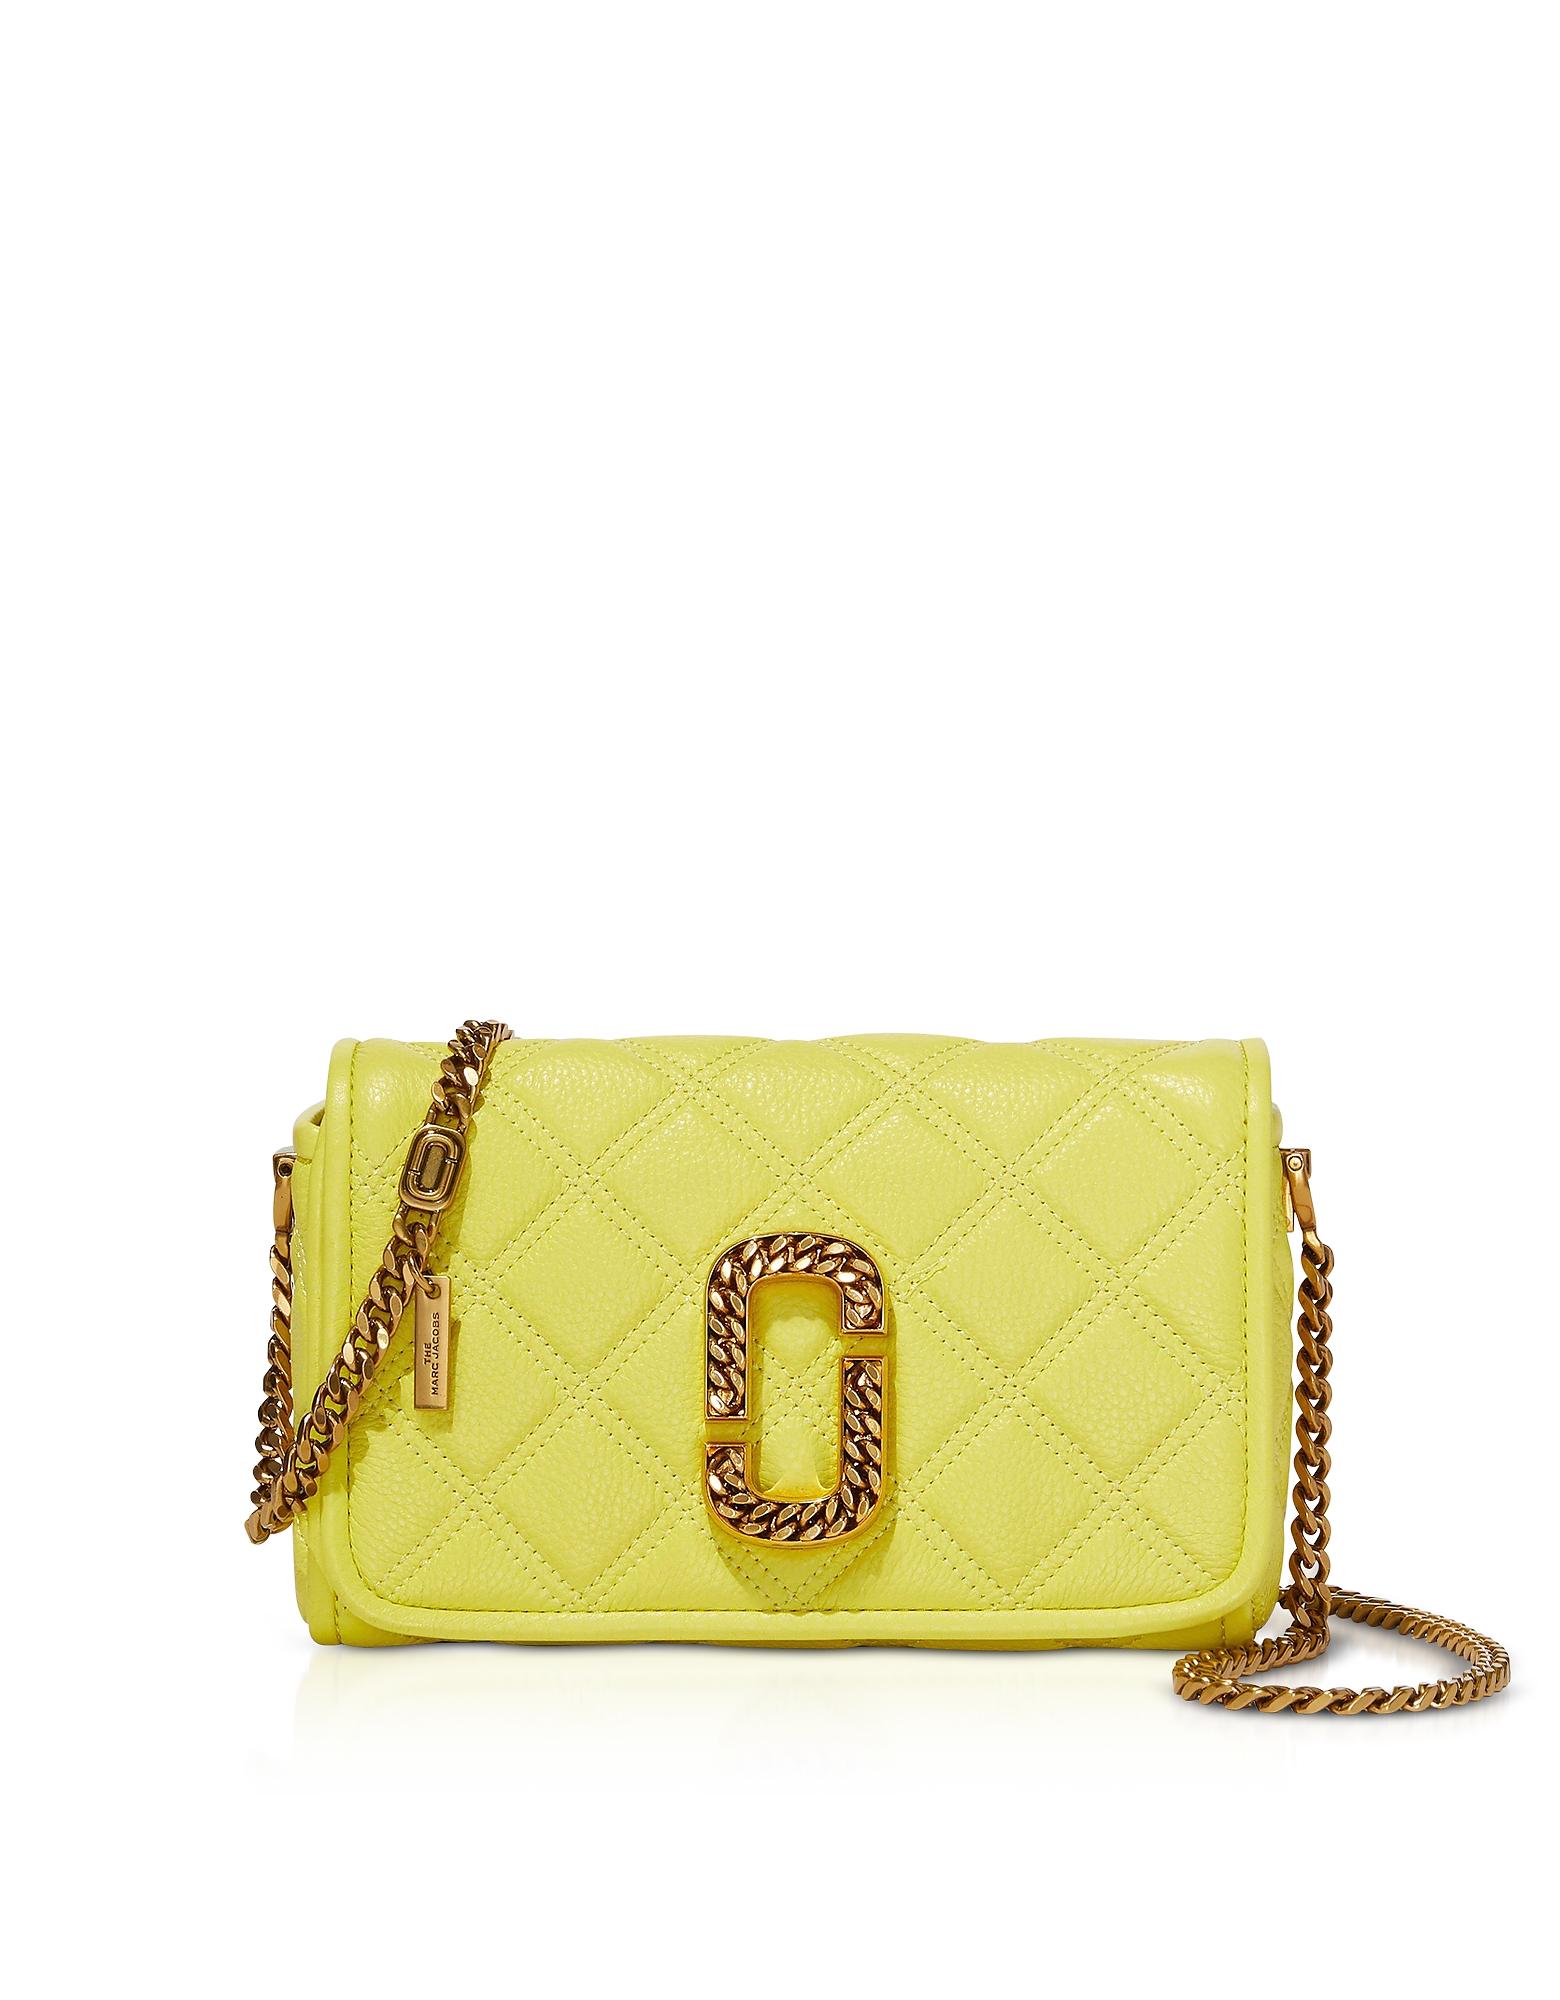 Marc Jacobs The Status Flap Quilted Leather Shoulder Bag in Yellow - Lyst